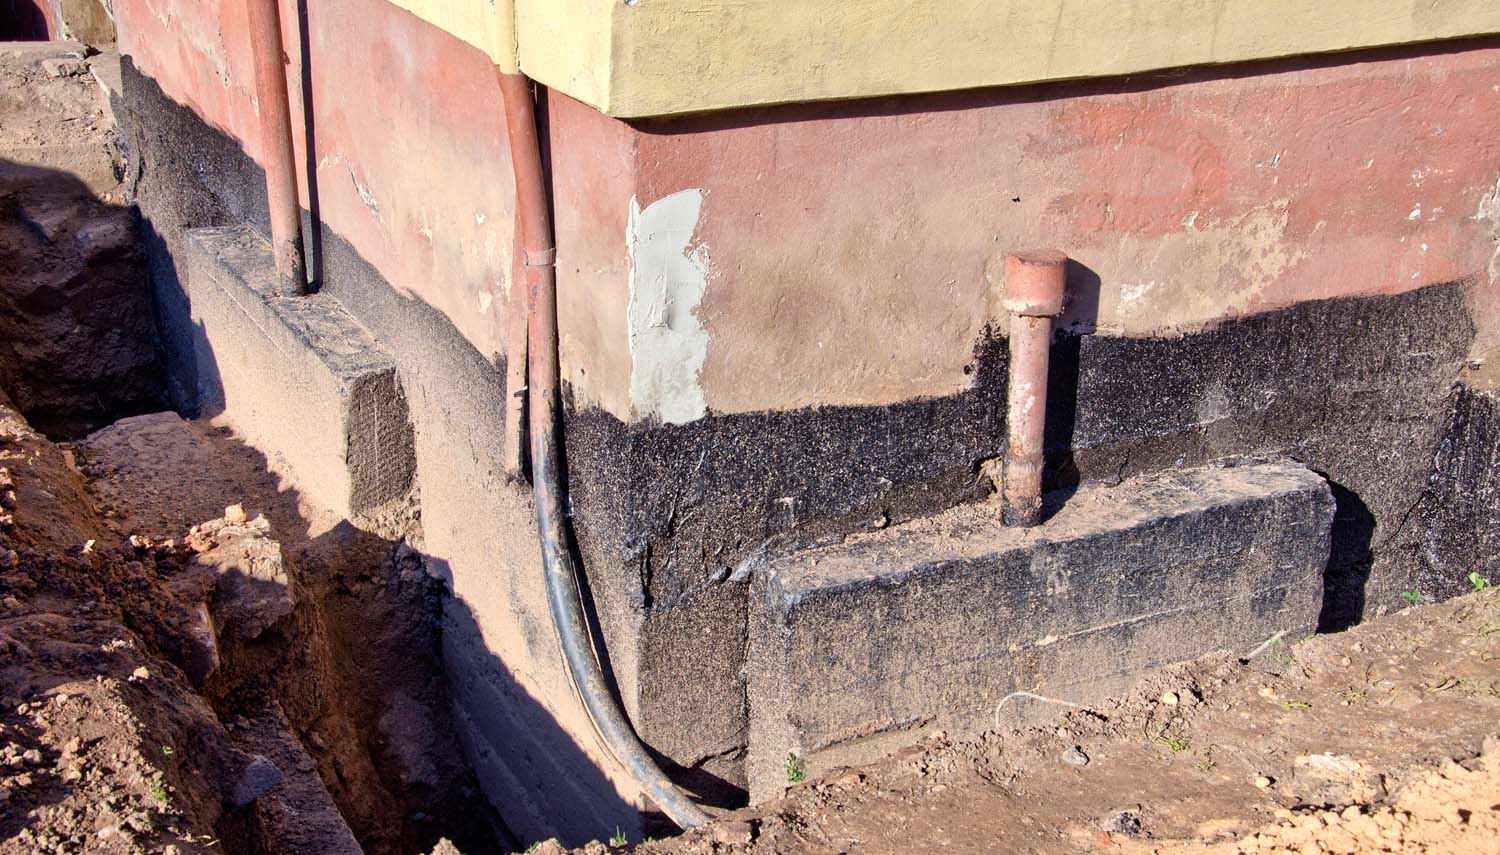 foundation repair is needed from this picture of a cracking crumbl9ng build corner